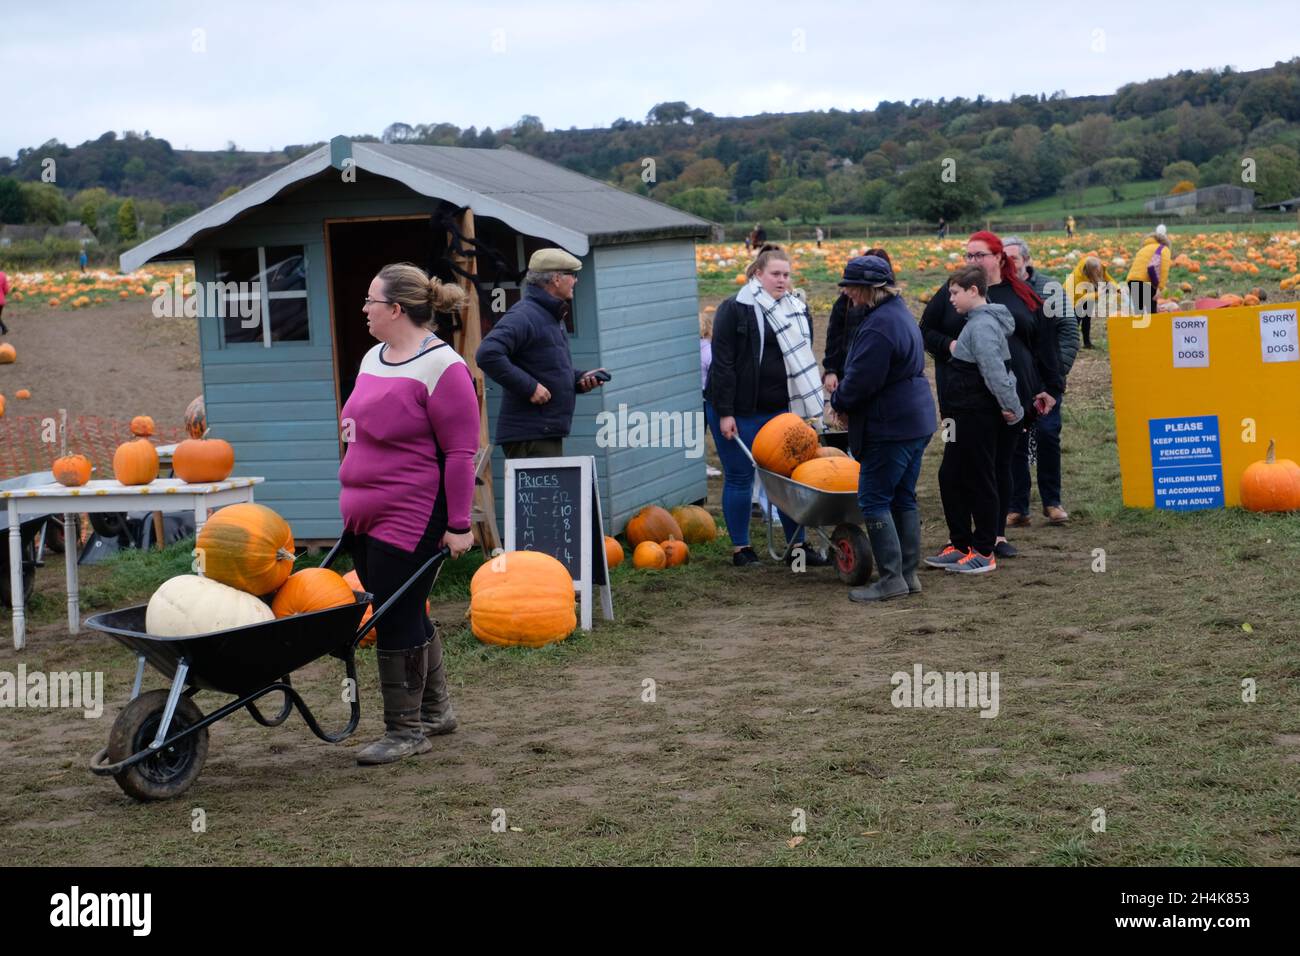 People queuing to buy pumpkins for Halloween picked from the field at Ashover Pumpkins, a pick your own pumpkin farm at Ashover, Derbyshire, UK Stock Photo